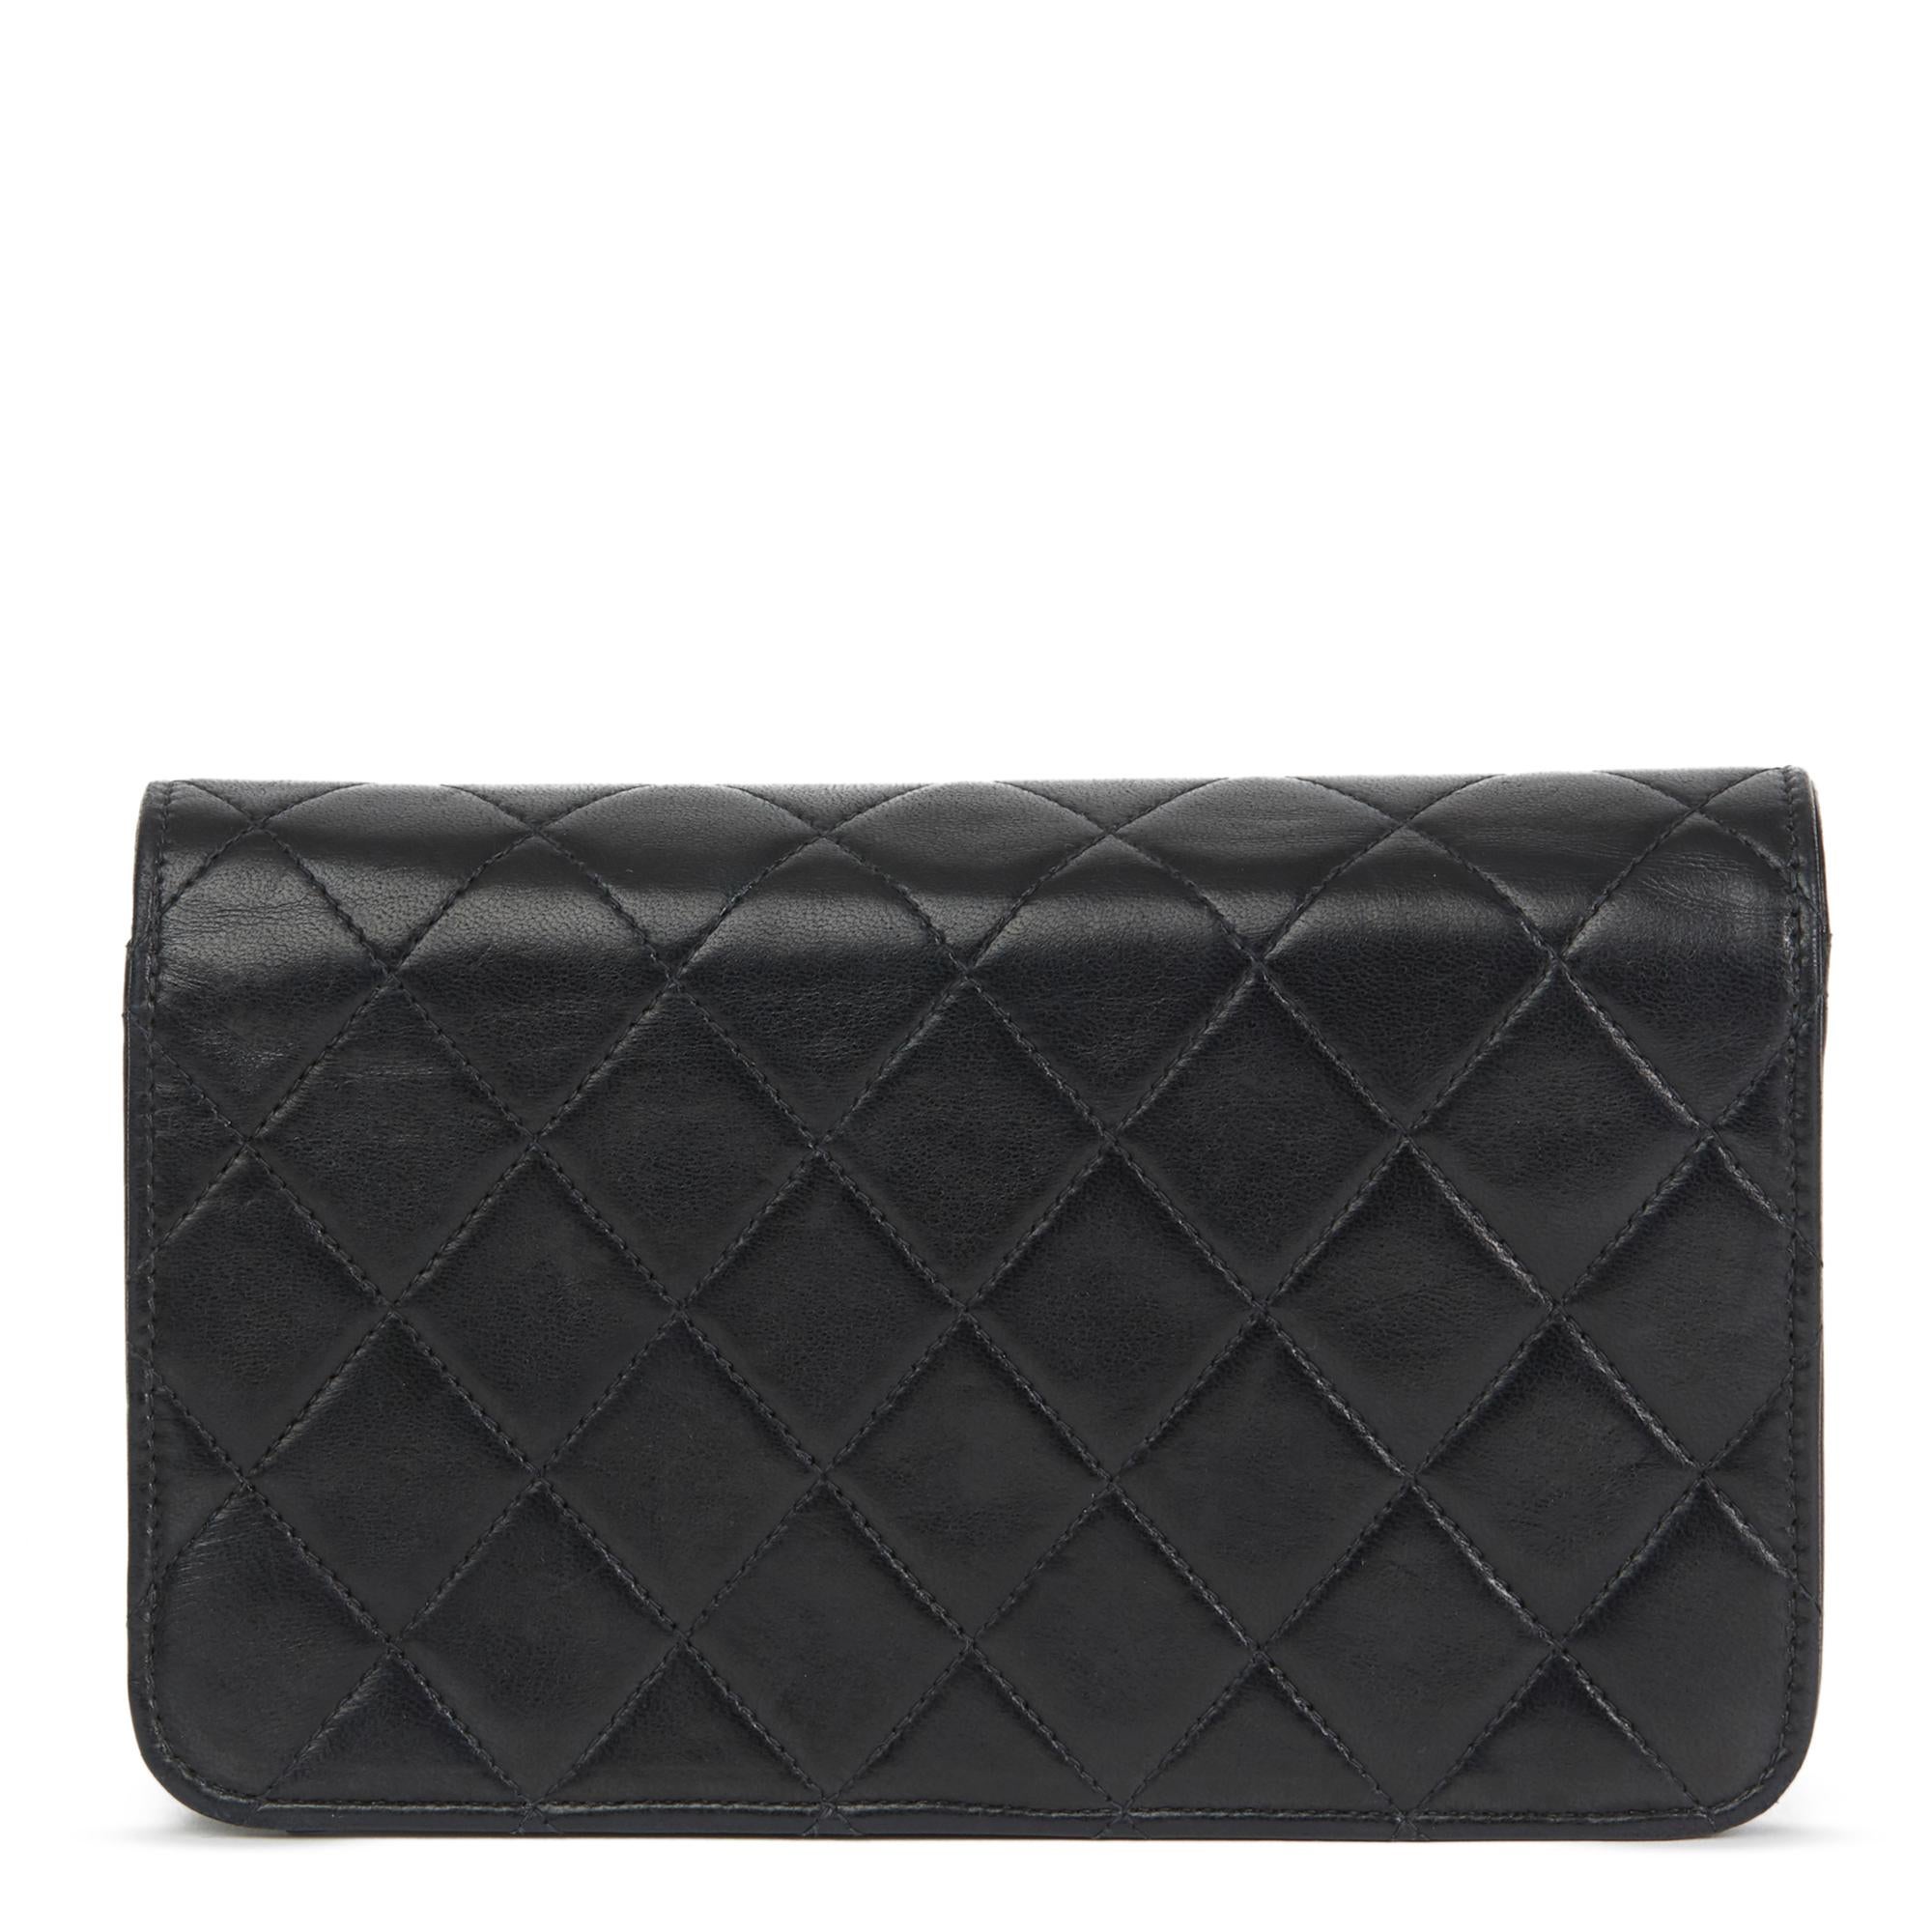 2001 Chanel Black Quilted Lambskin Mini Flap Bag  1